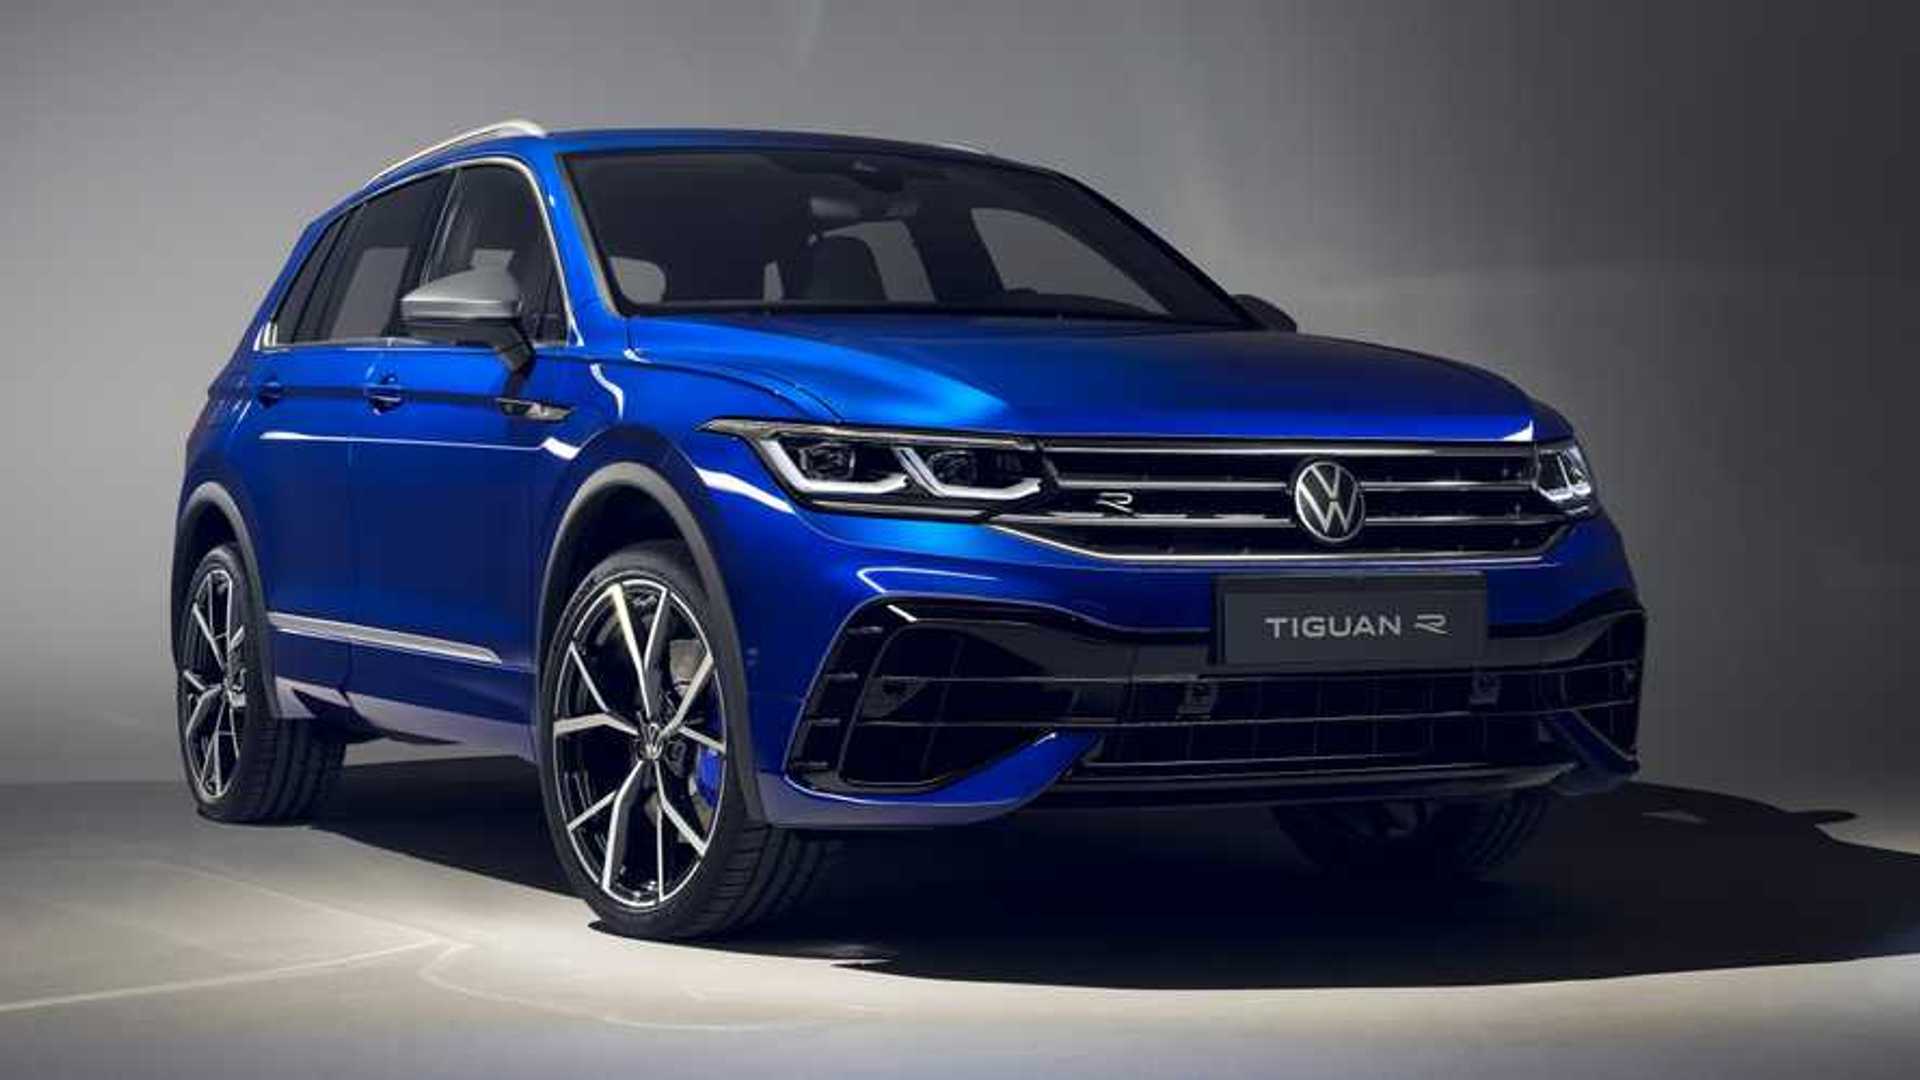 2021 VW Tiguan Videos Show Extended Lineup With eHybrid And R Models